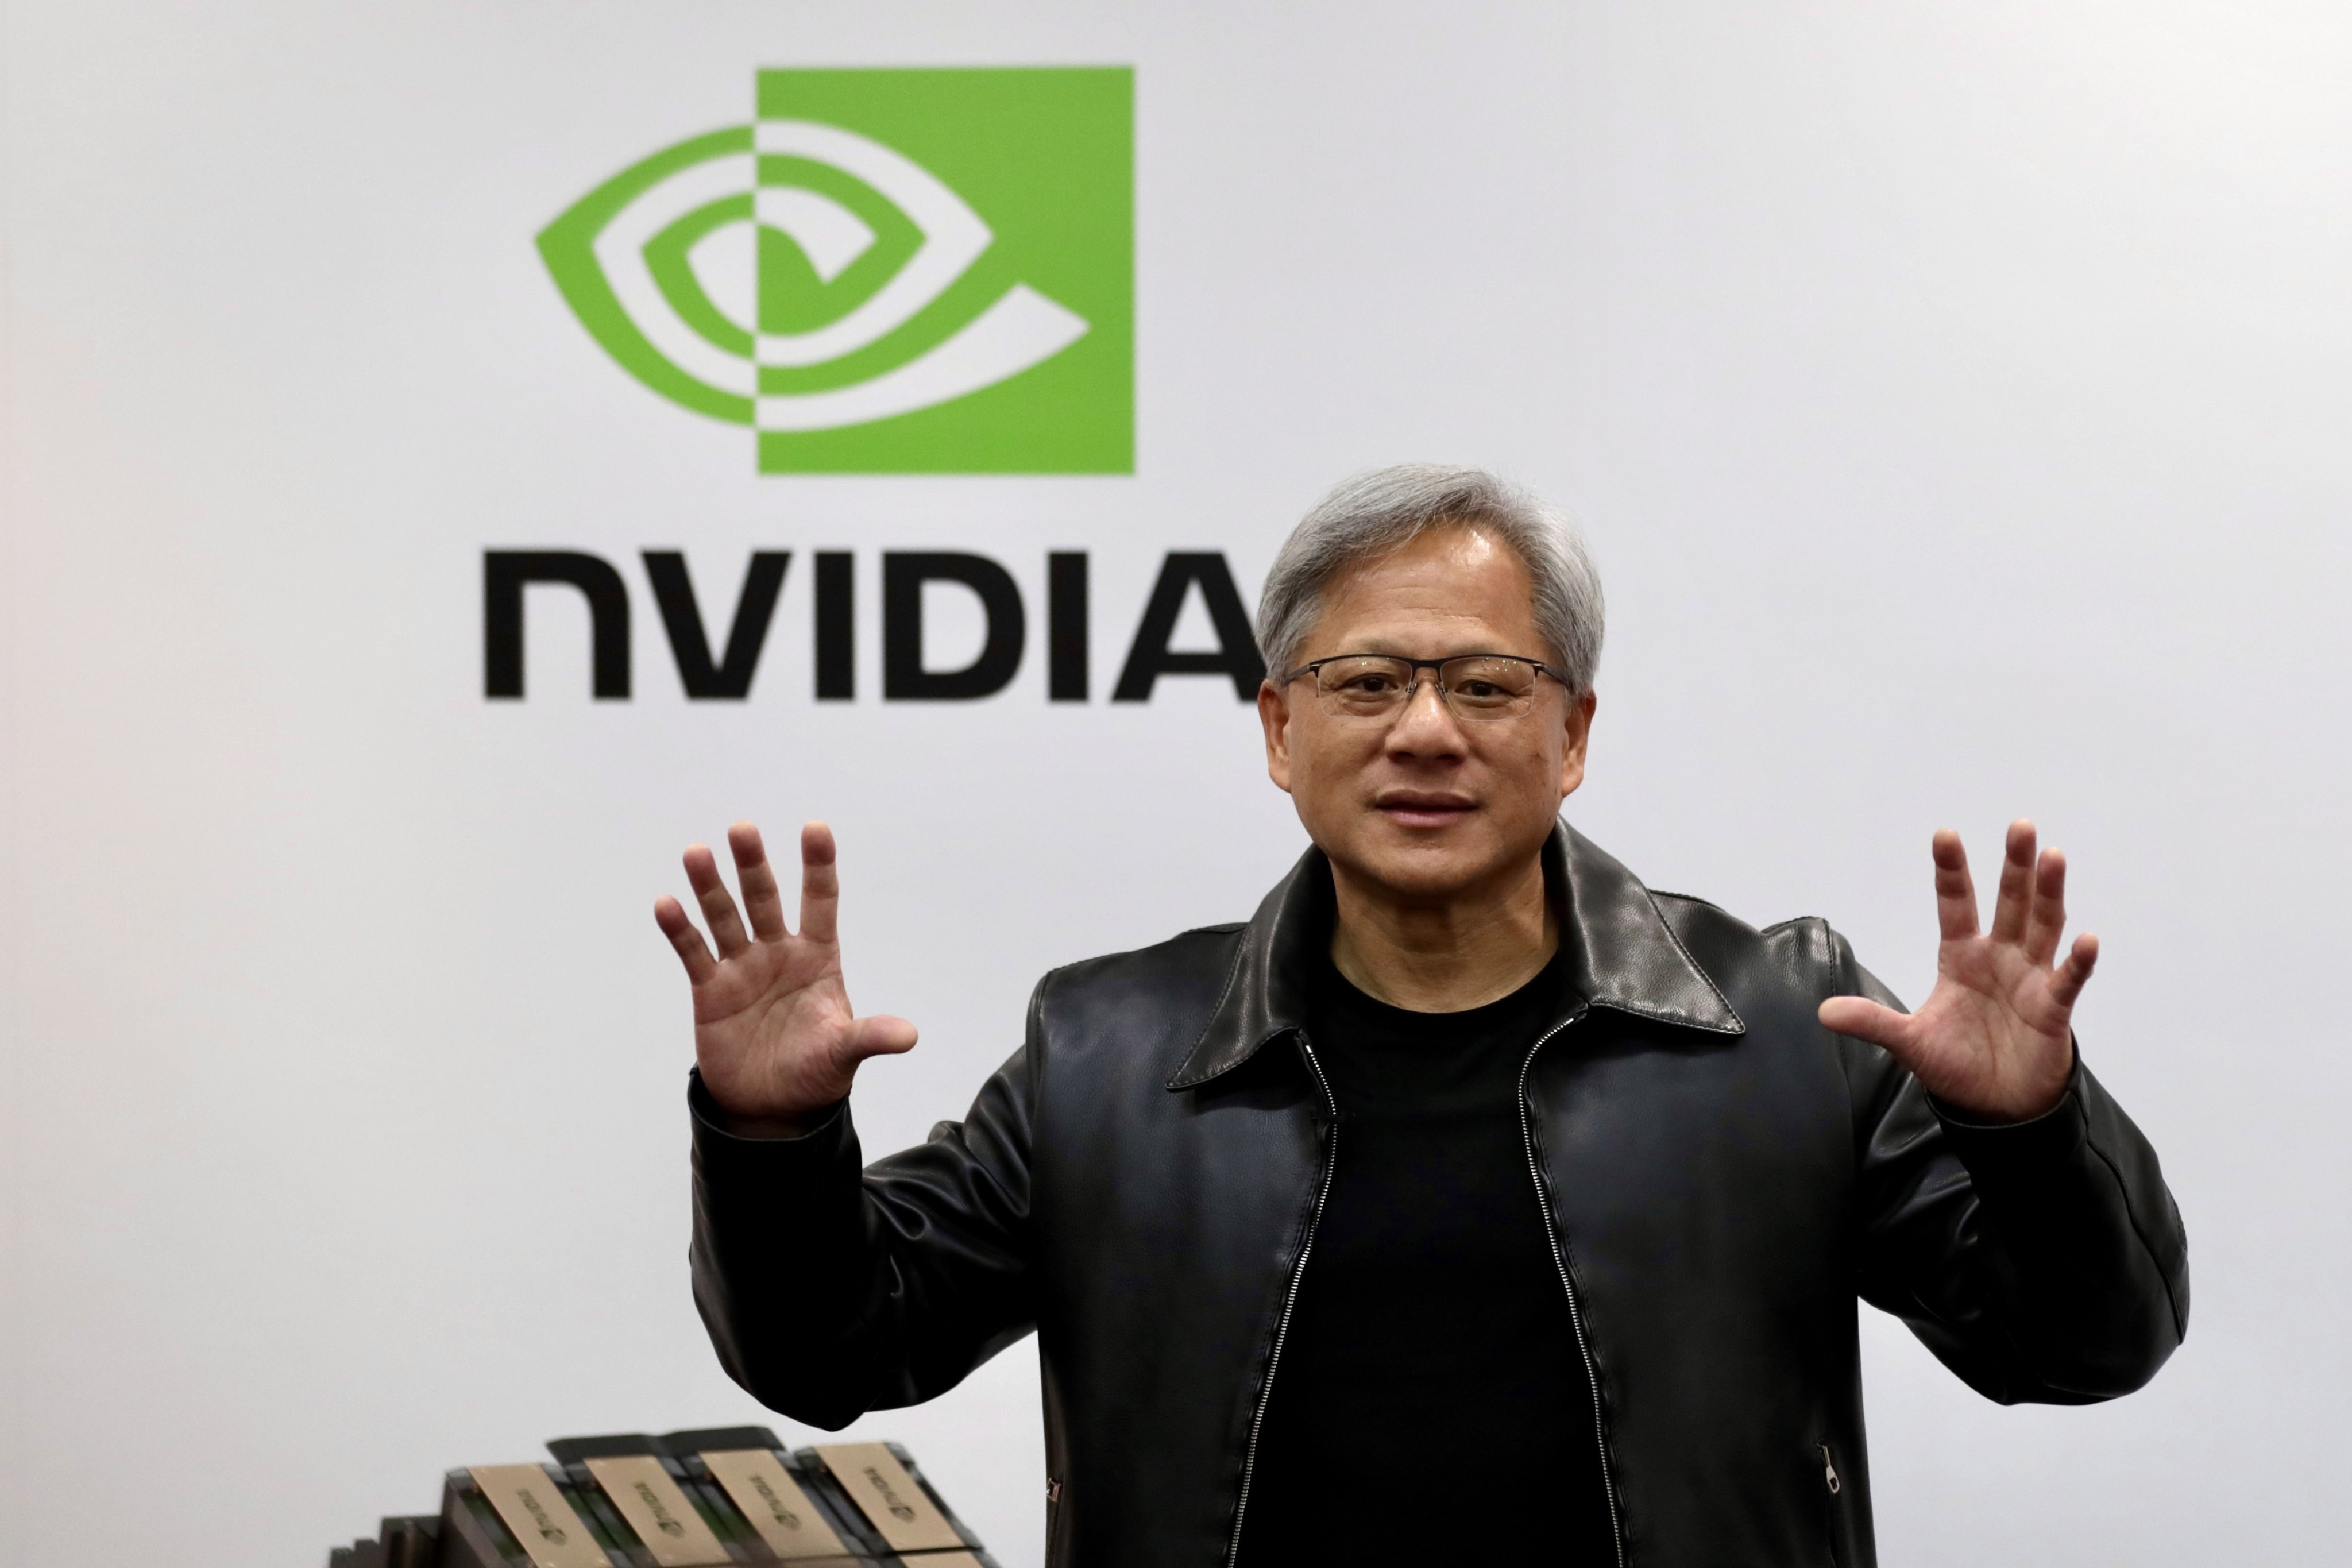 Nvidia founder and CEO Jensen Huang speaks at Computex Taipei in Taipei on Tuesday. Photo: EPA-EFE